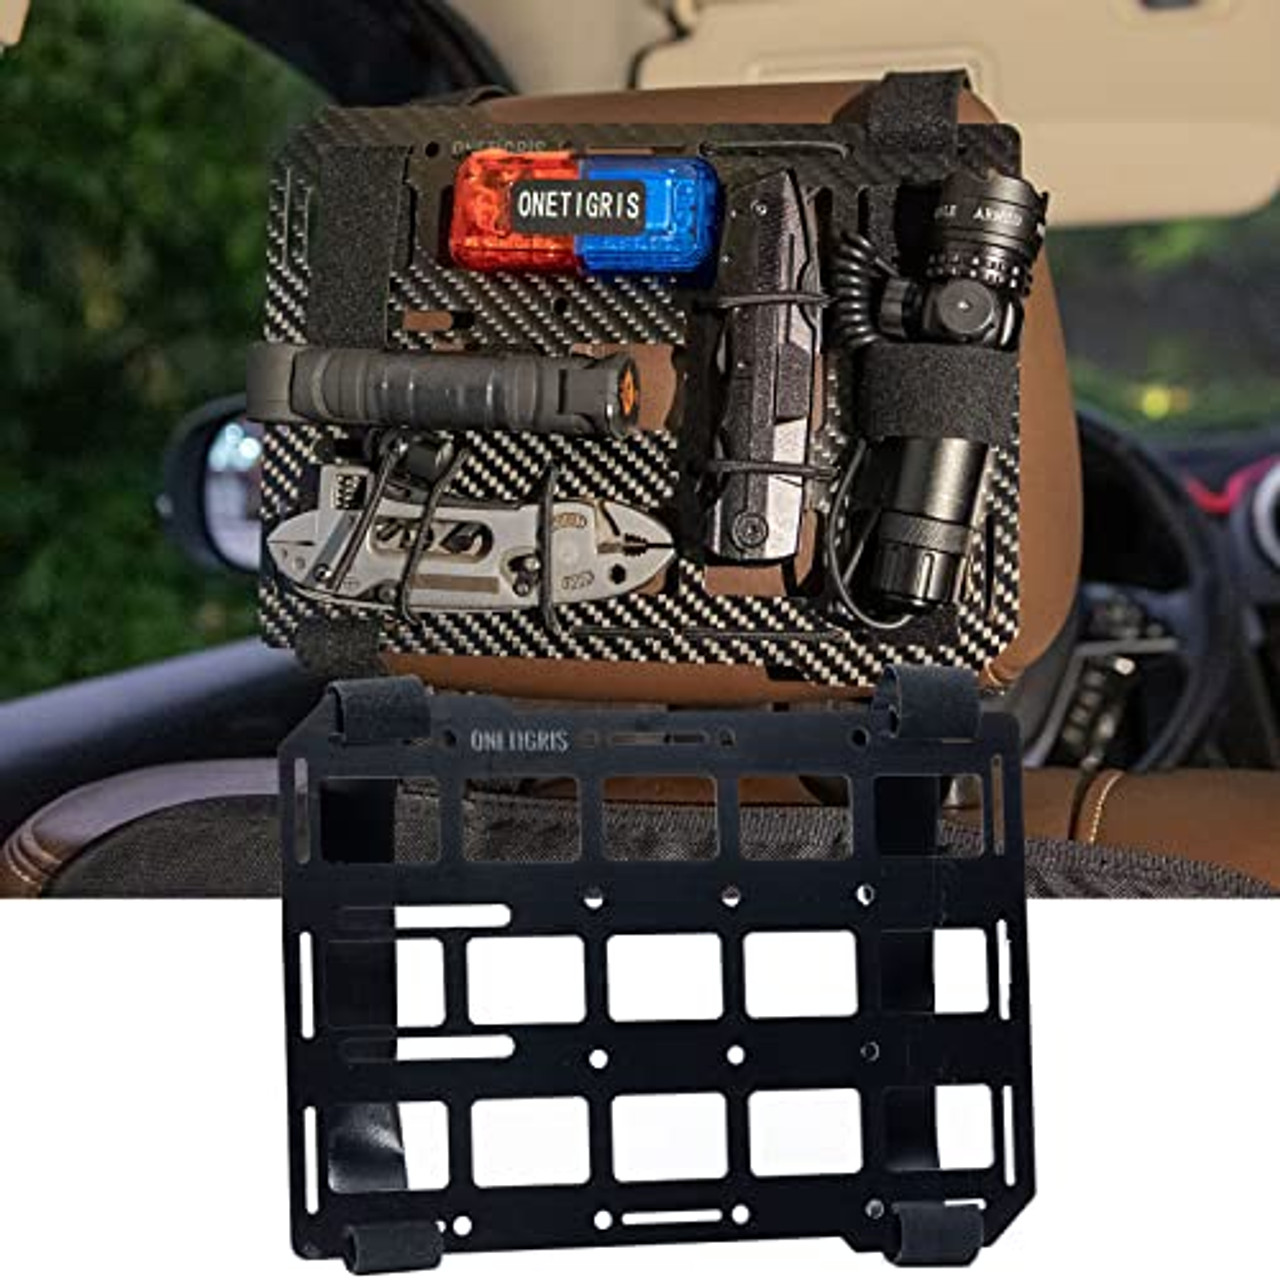 Tactical Car Seat Back Organizer  Rigid Molle Panels for Vehicles